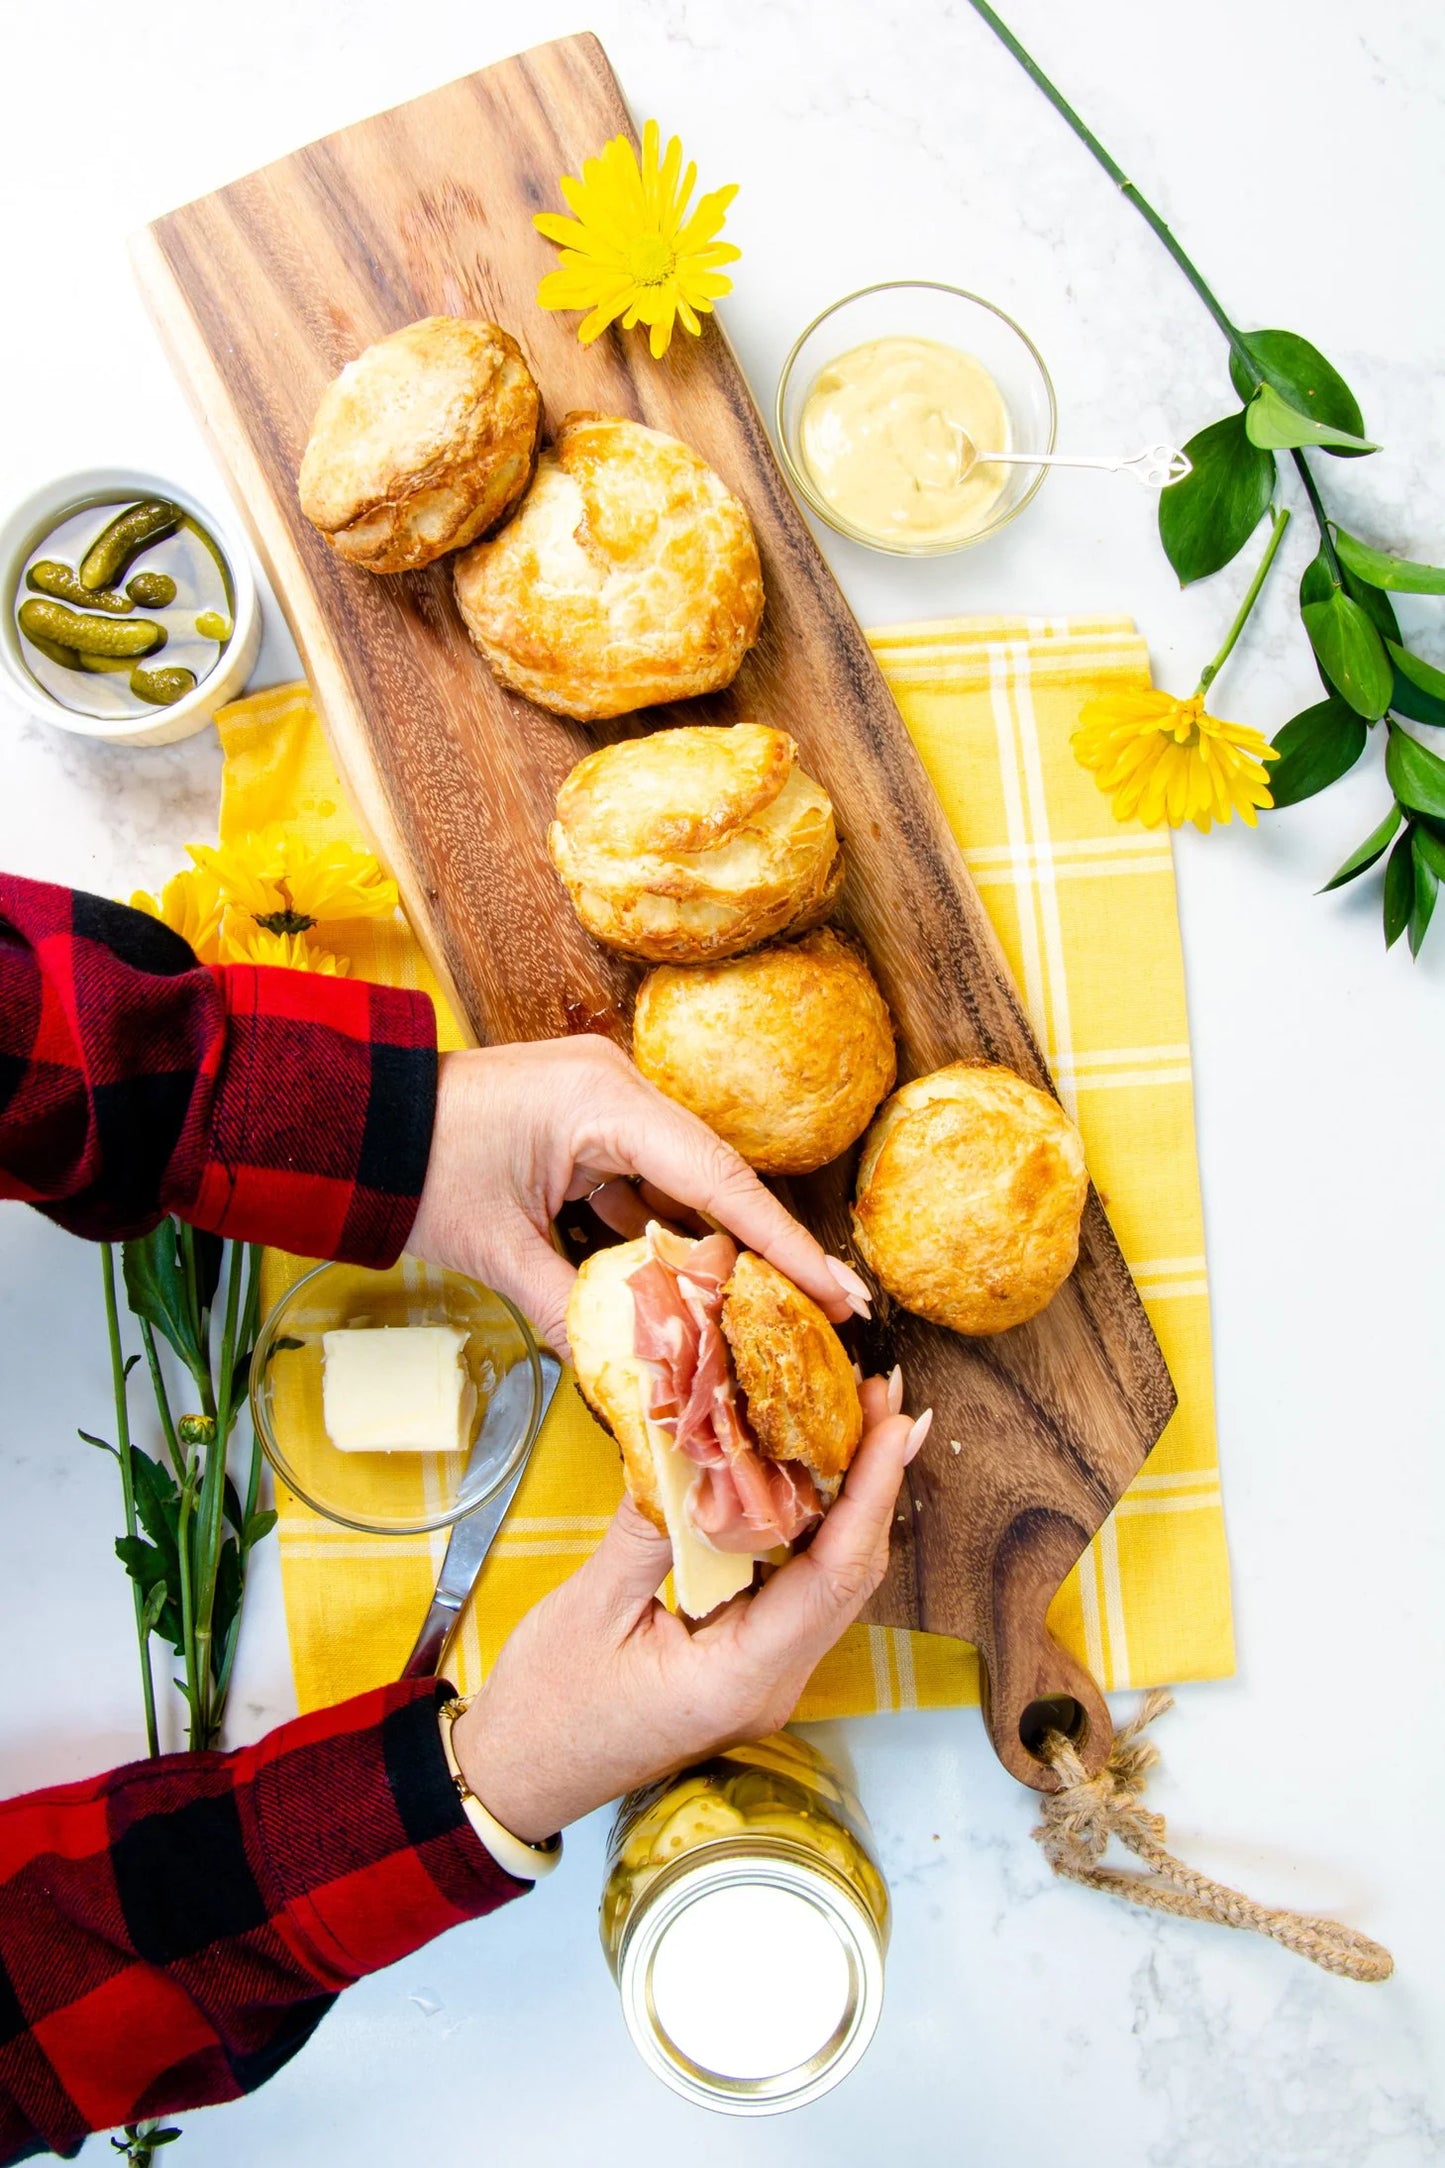 Daisy's Frozen Bake-at-Home Buttermilk Biscuits